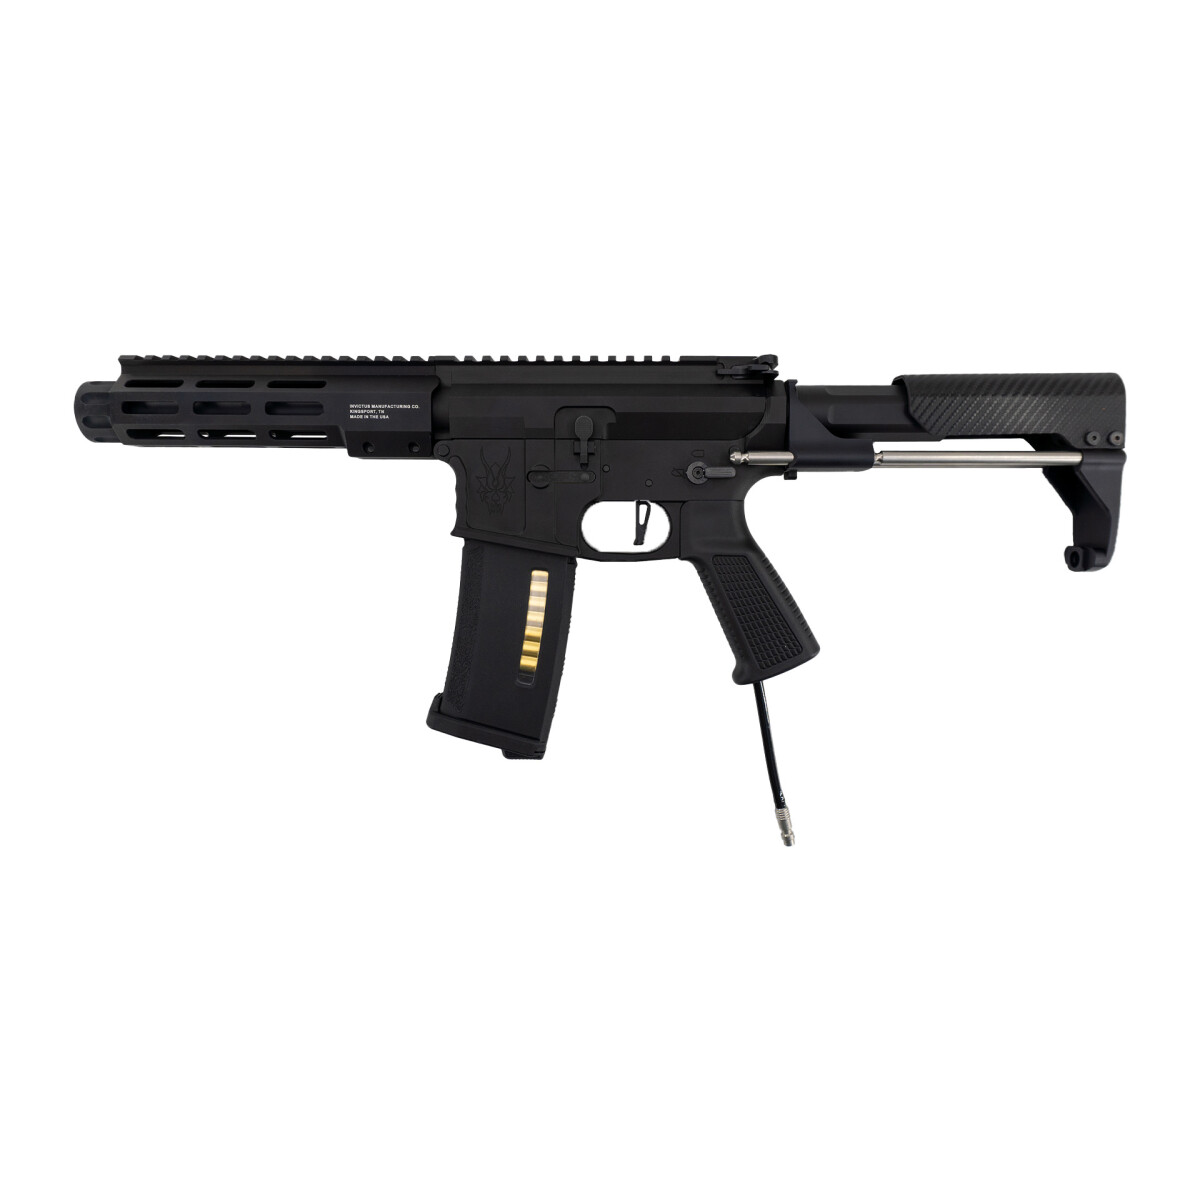 Wolverine MTW Black Edition 7"PDW, HPA, Black